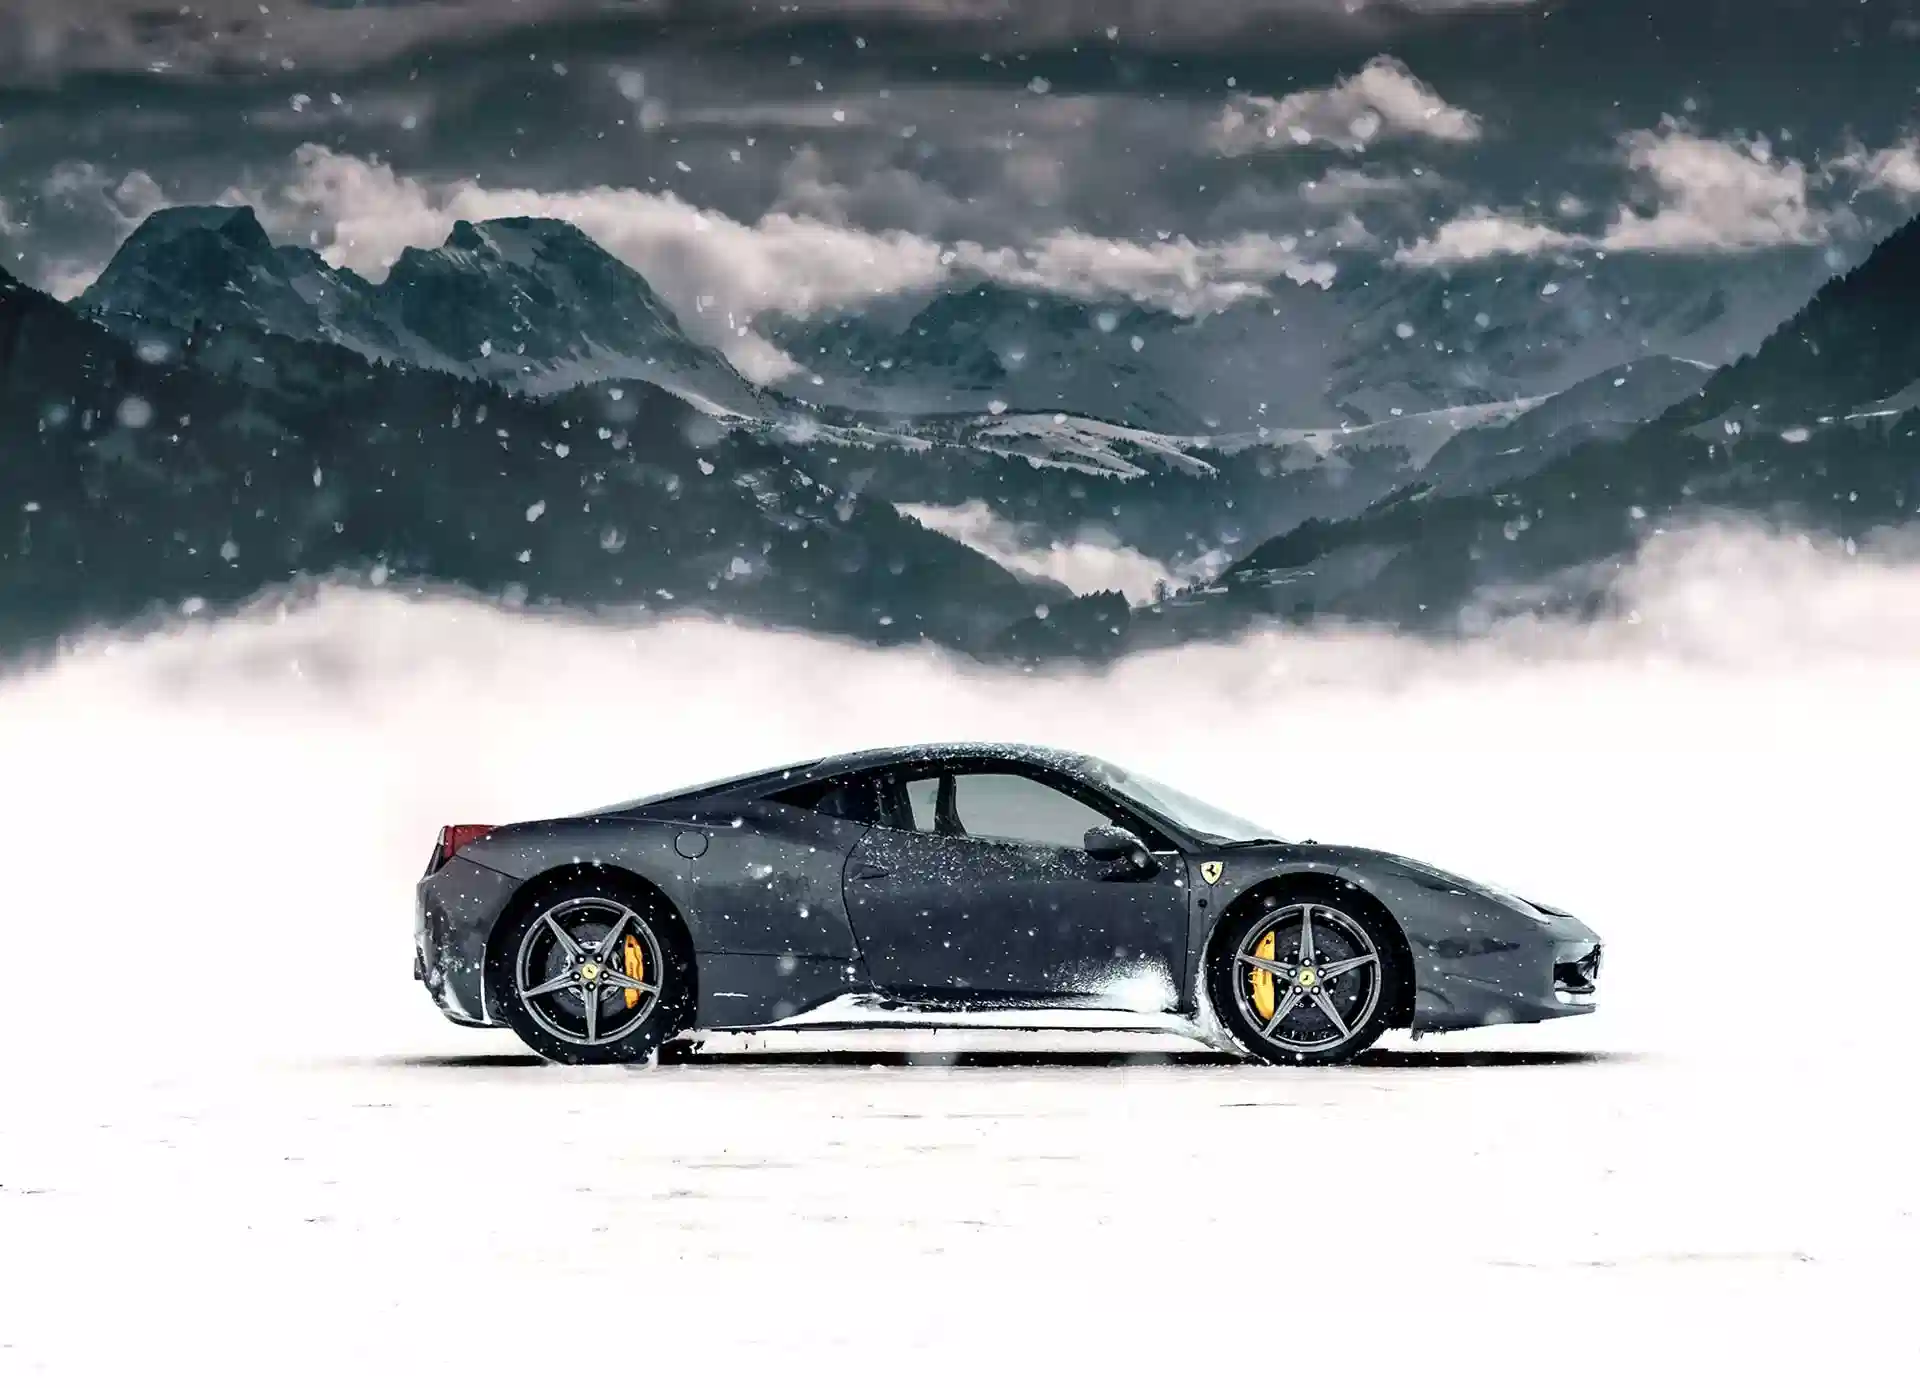 Background Image of a Car in a Snow Storm